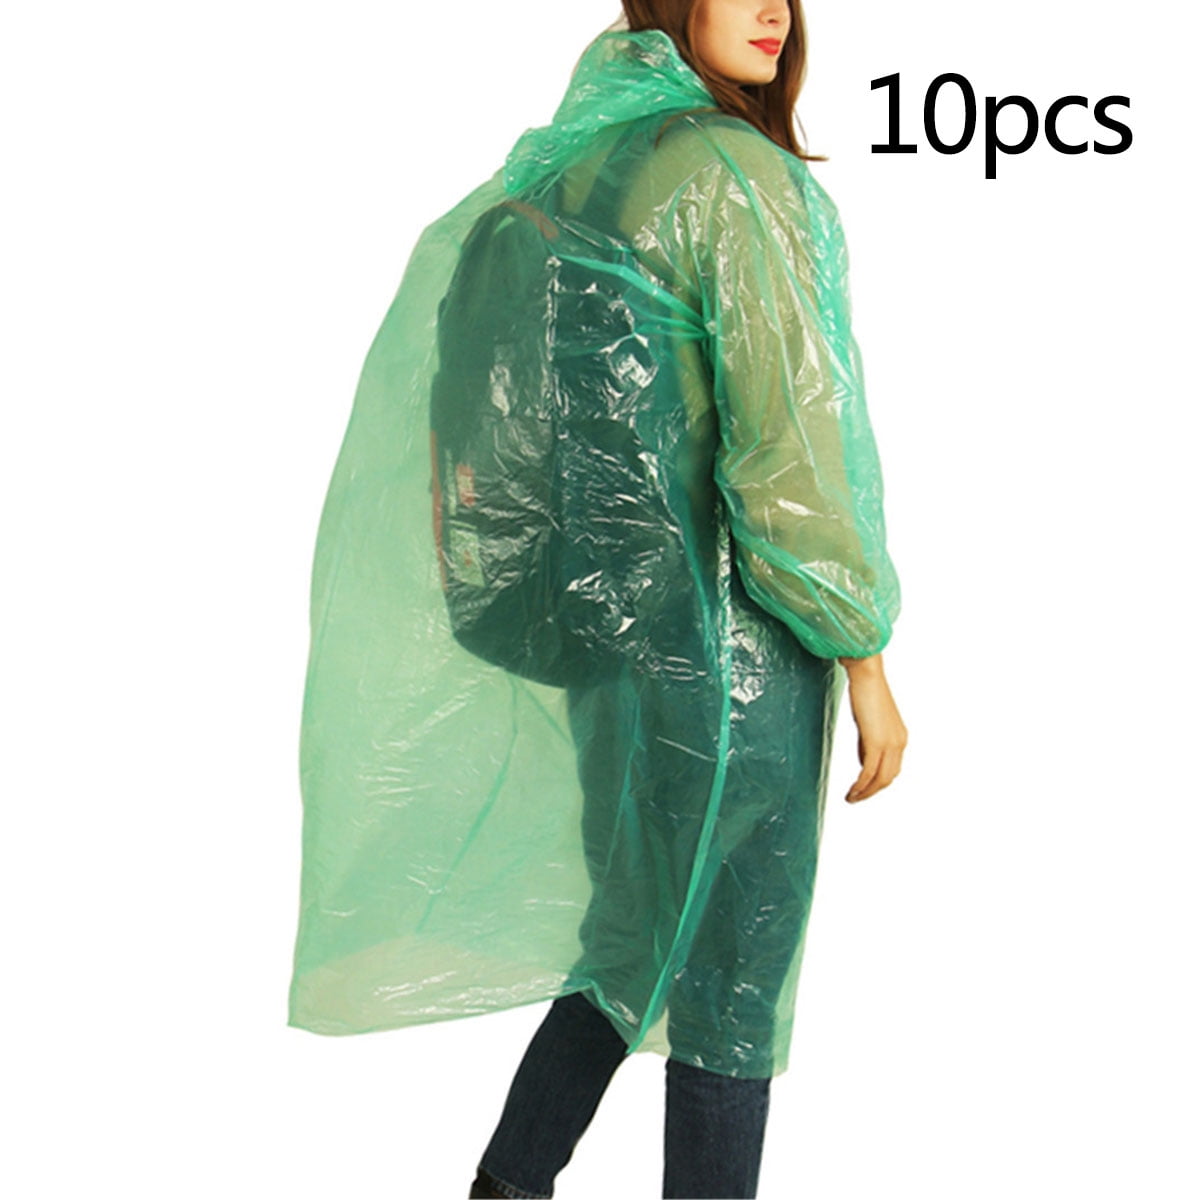 10Pcs Disposable Hooded Poncho Emergency Raincoat Adult Camping Hiking Travel 